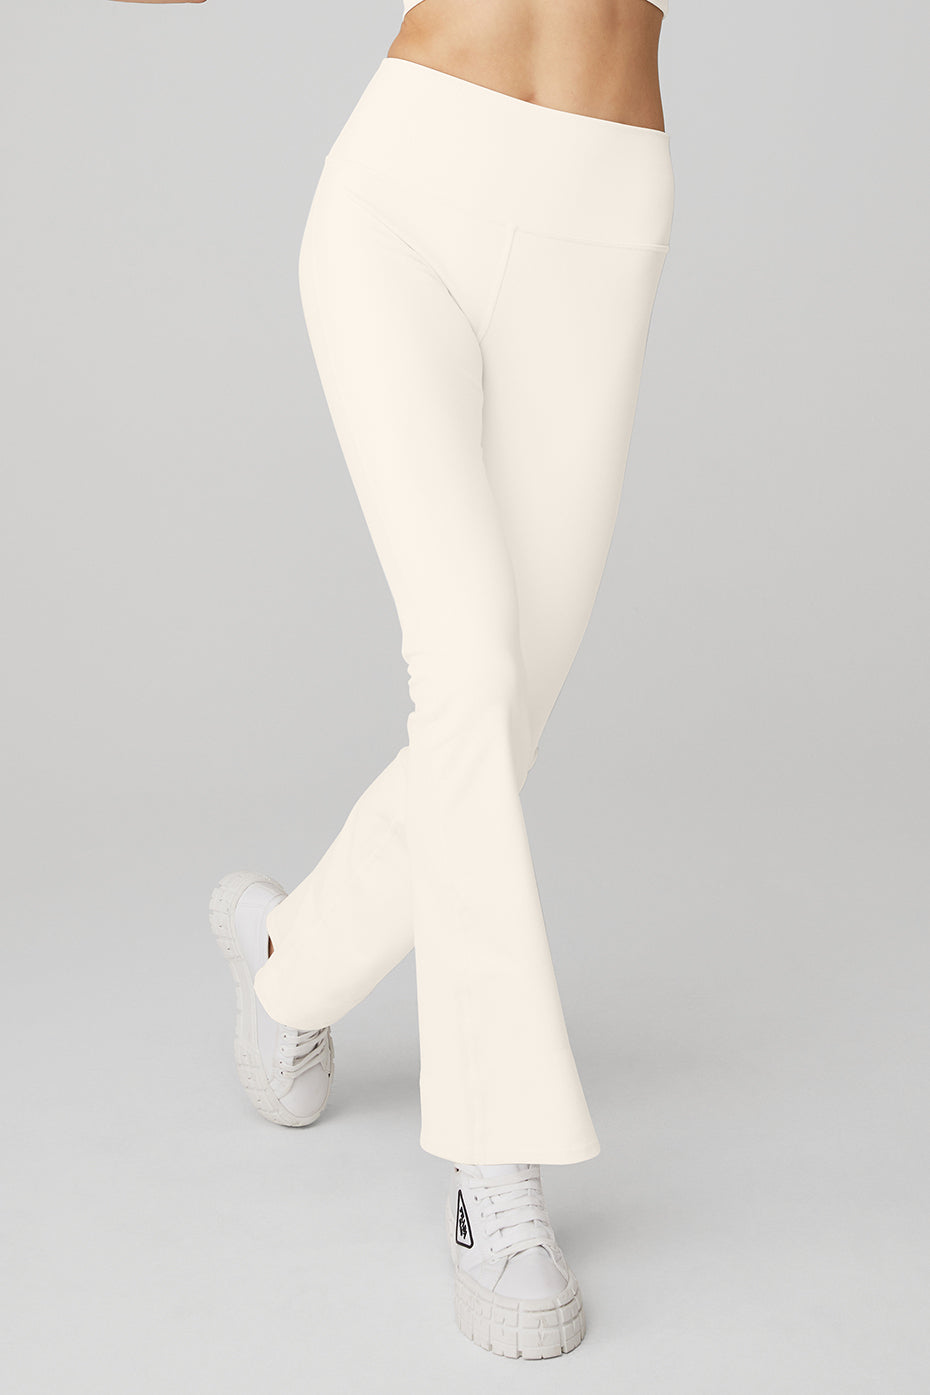 Airbrush High-Waist 7/8 Bootcut Legging in Ivory by Alo Yoga